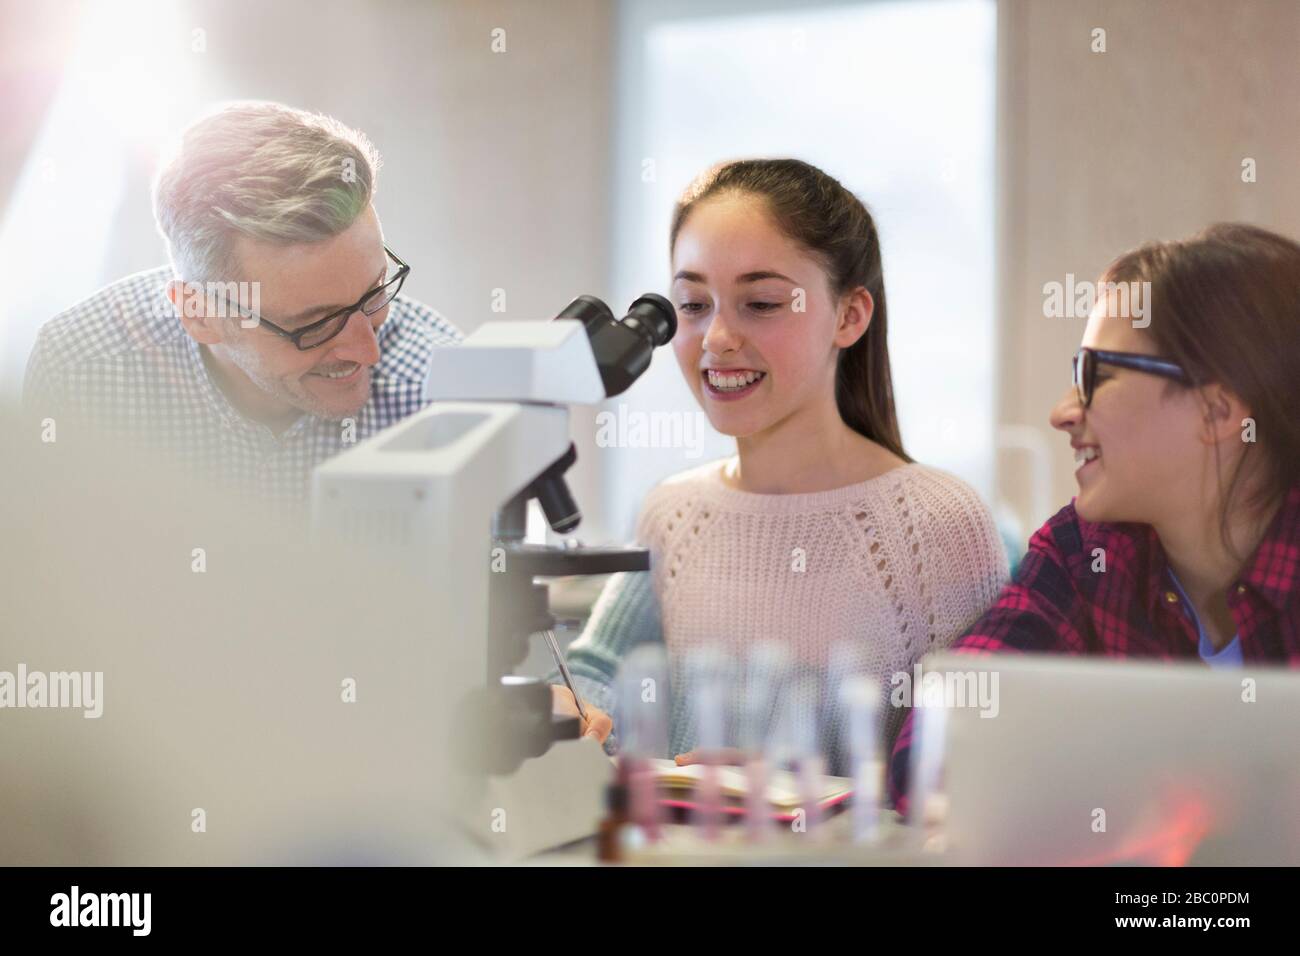 Male teacher and girl students conducting scientific experiment at microscope in laboratory classroom Stock Photo